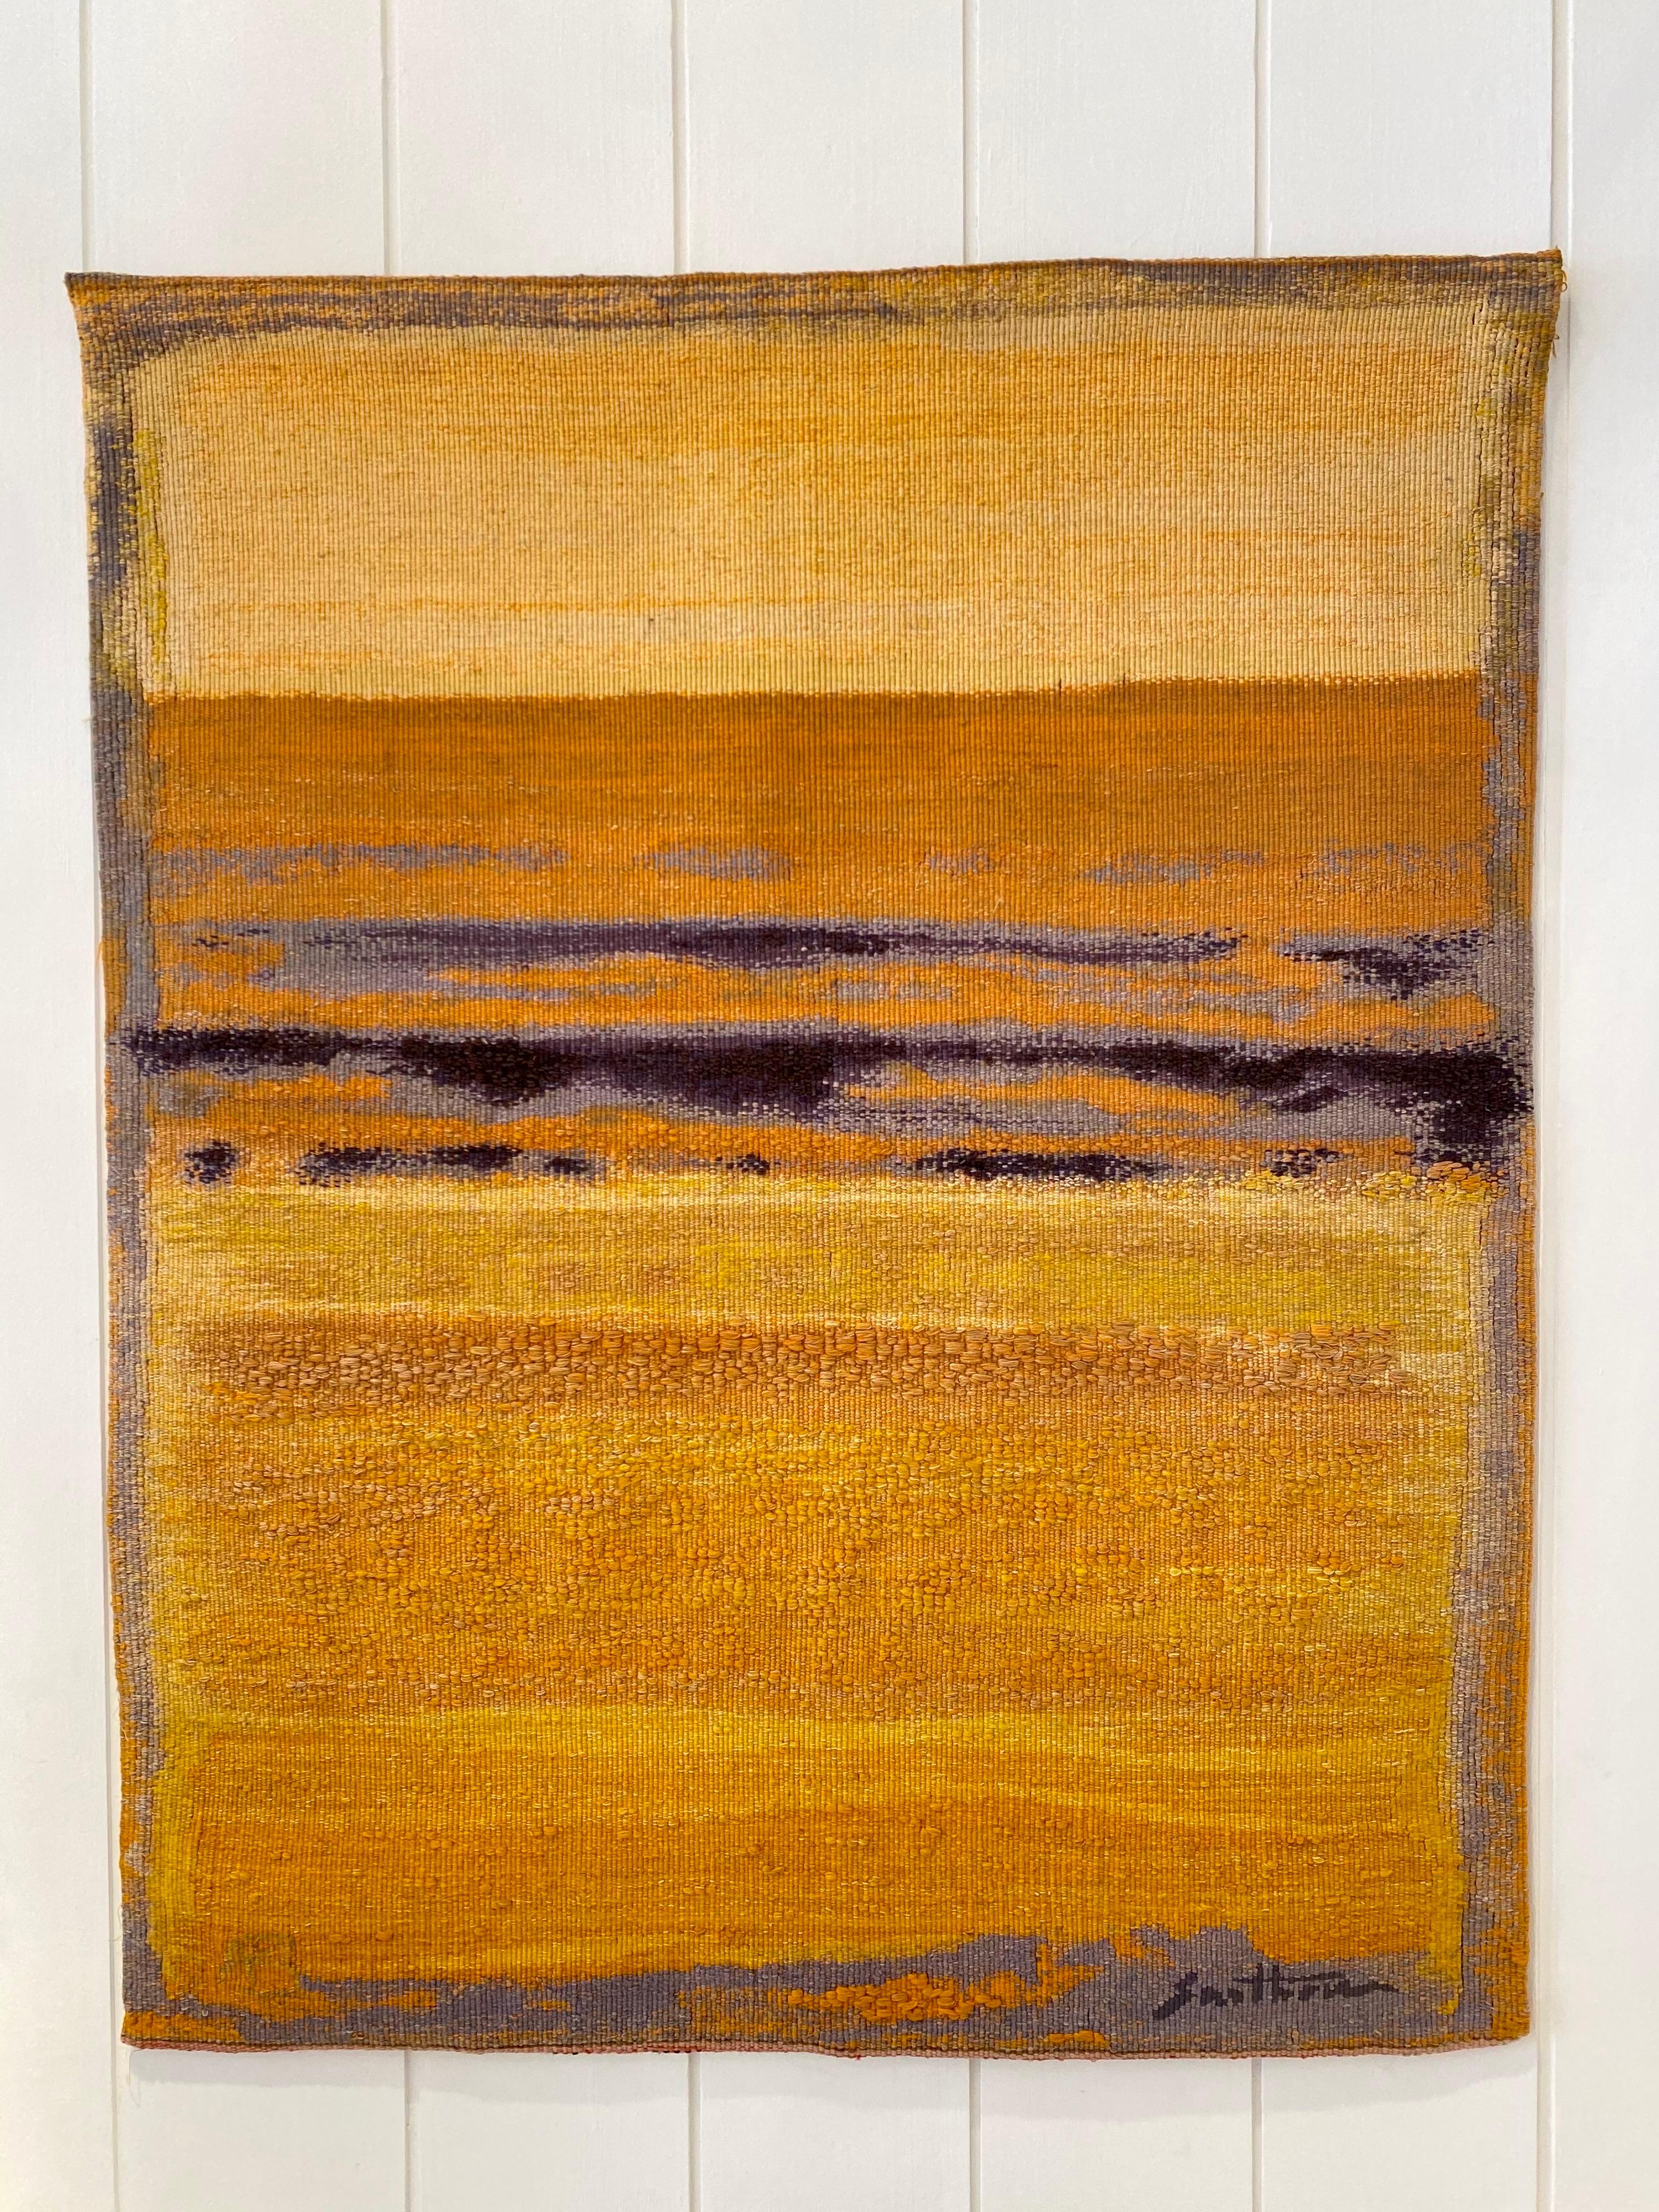 1974 Wool Tapestry By Maurice Elie Sarthou
Maker :Atelier 3
Number 1 of 6
Title: The Beach
signed on the front and dated and signed on the back
Perfect condition